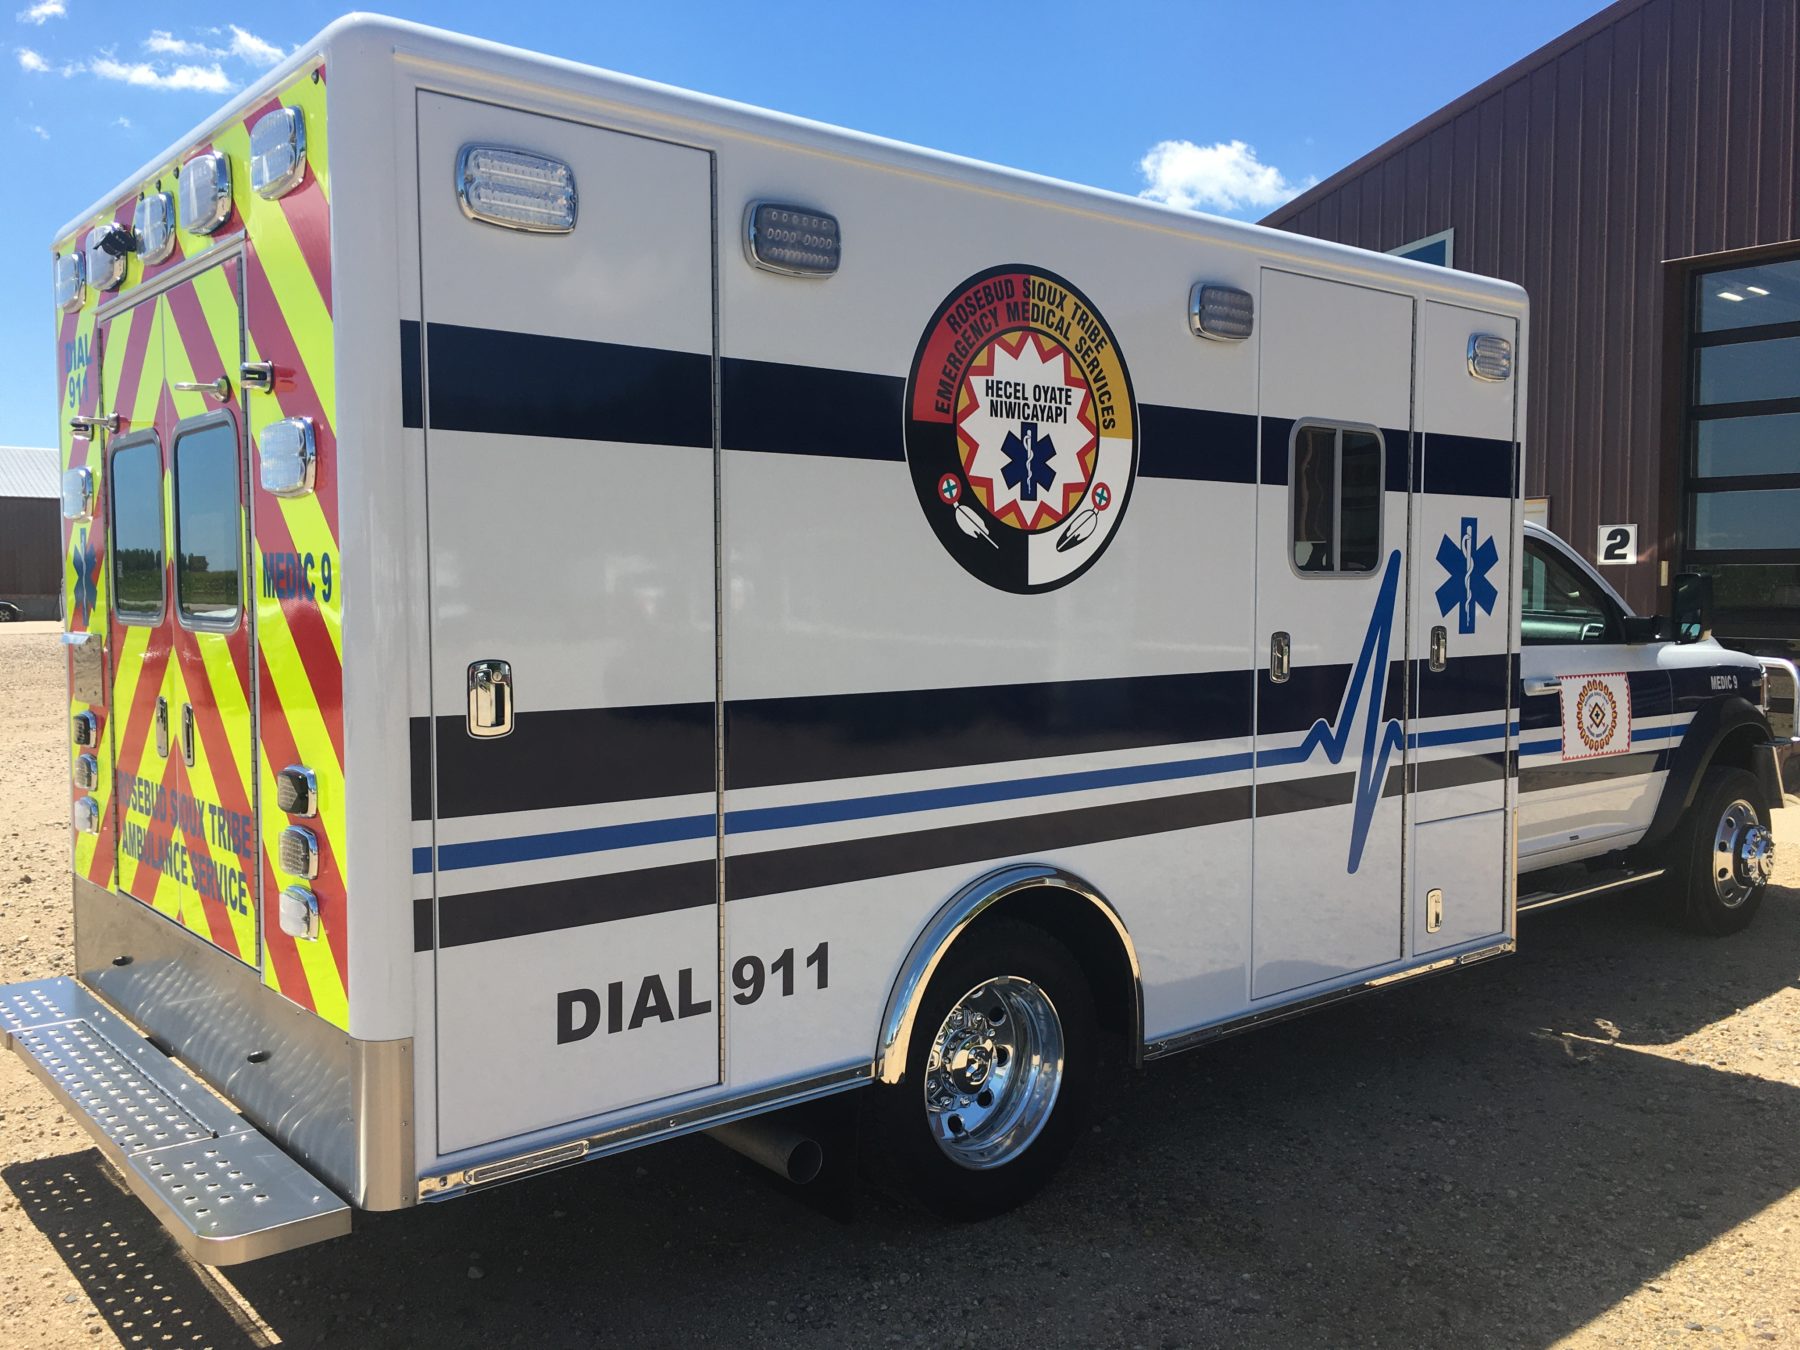 2019 Ram 4500 4x4 Heavy Duty Ambulance For Sale – Picture 9